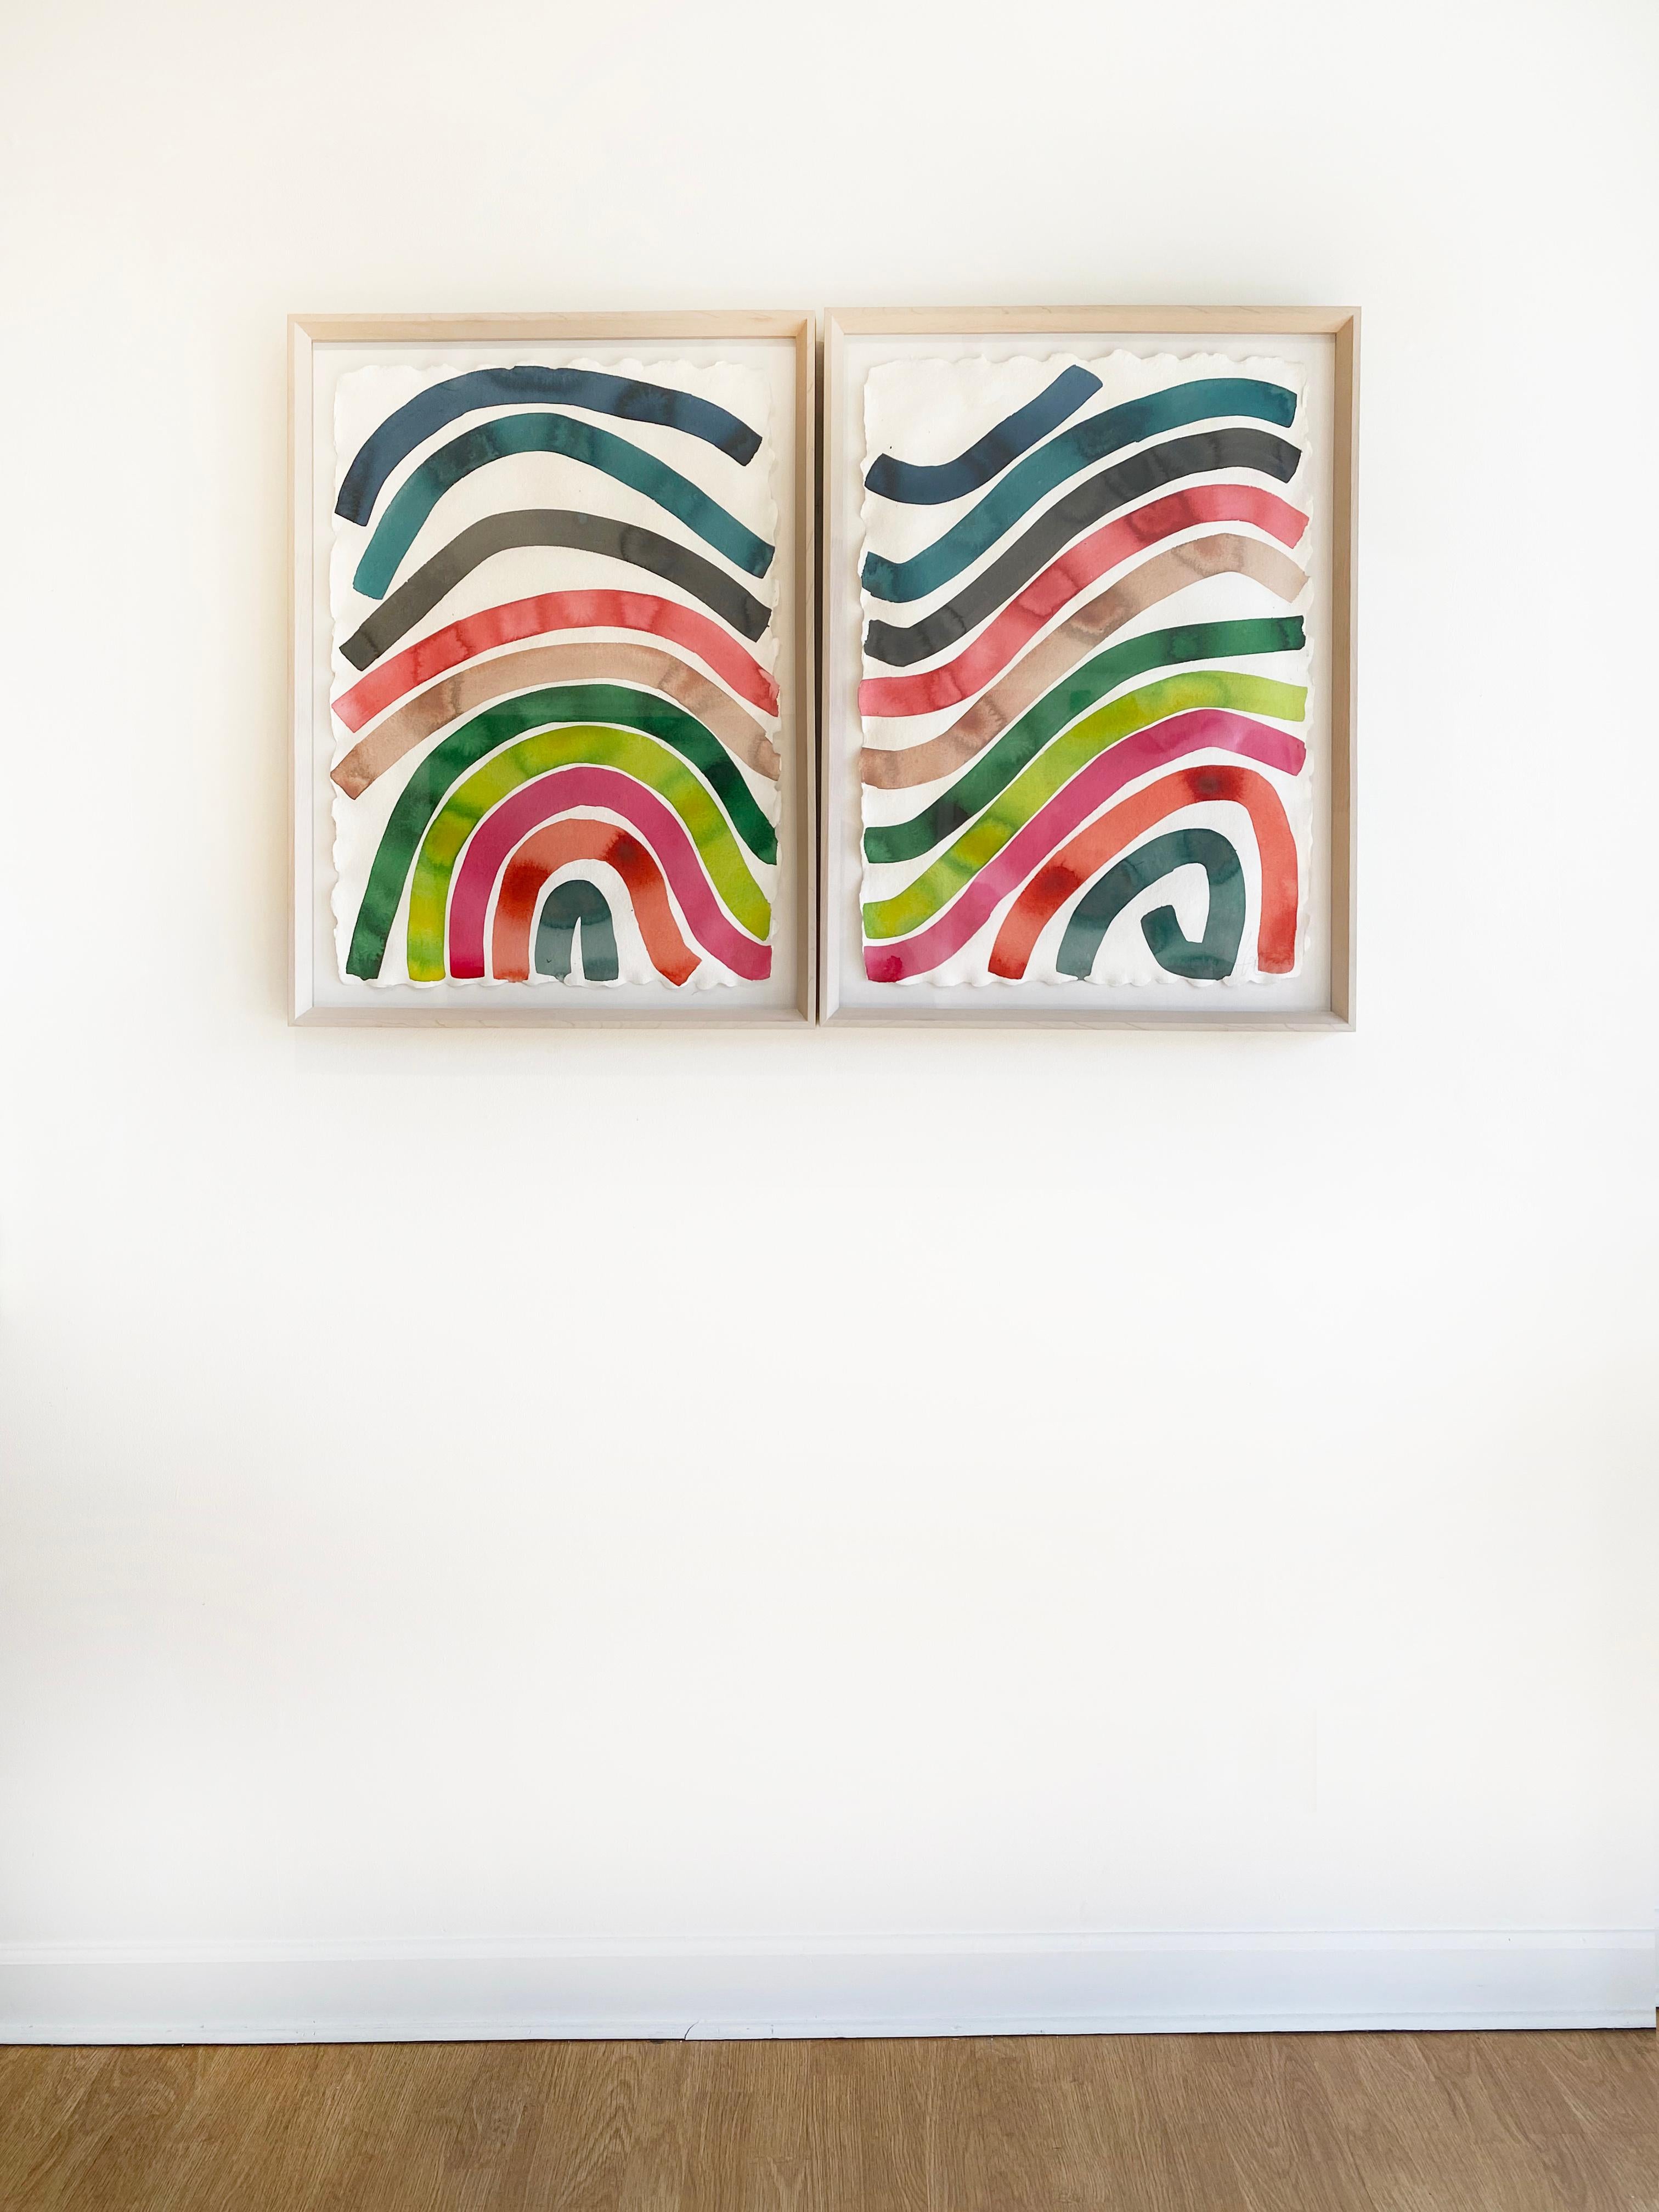 Colorful Abstract Ink and Watercolor Painting, Diptych, by Kate Roebuck 'Waves' For Sale 3